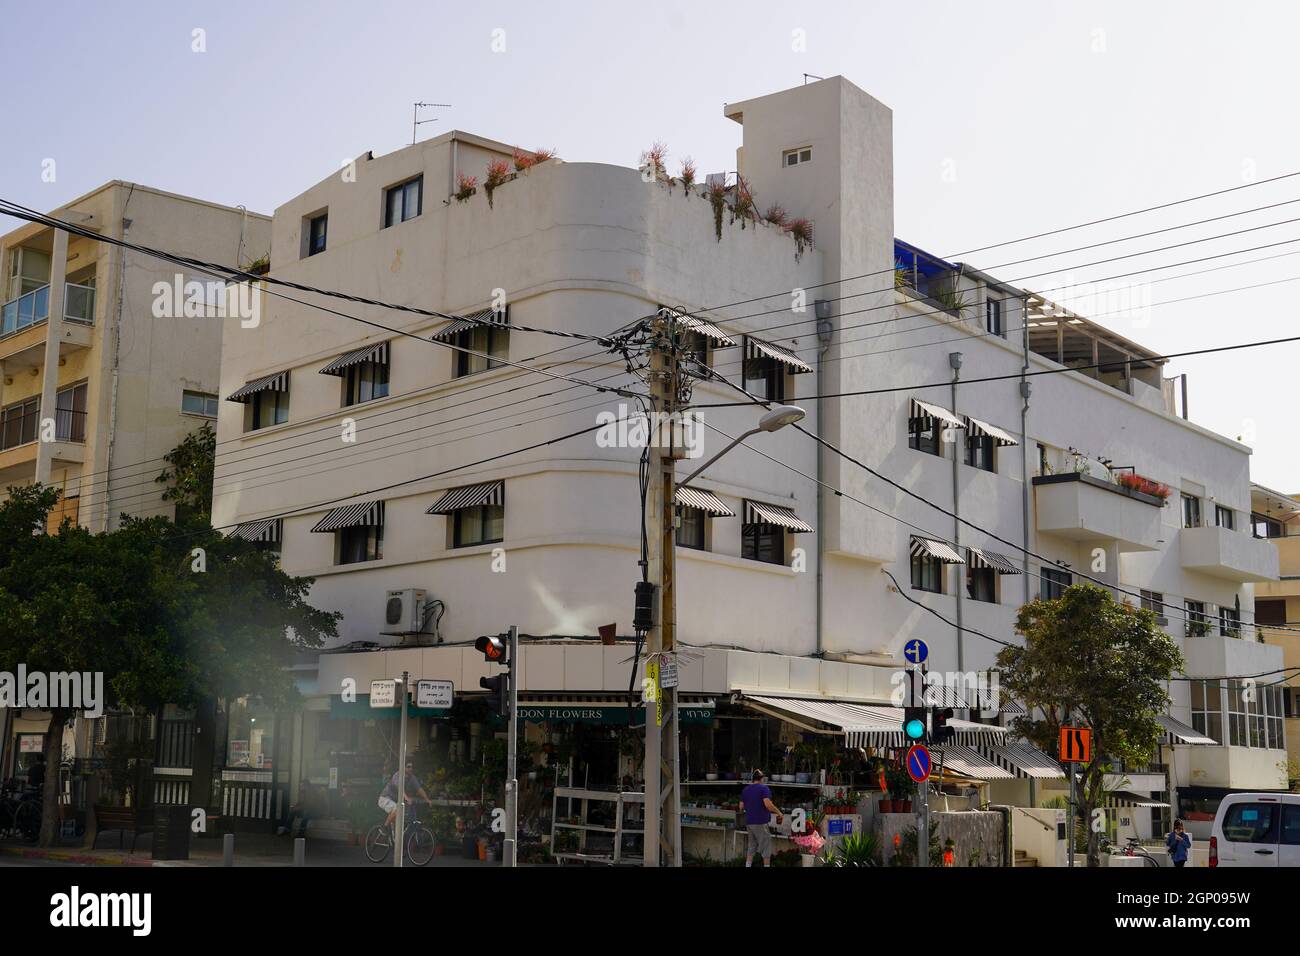 Bauhaus Architecture at 19 Gordon Street, Tel Aviv. The White City refers to a collection of over 4,000 buildings built in the Bauhaus or Internationa Stock Photo